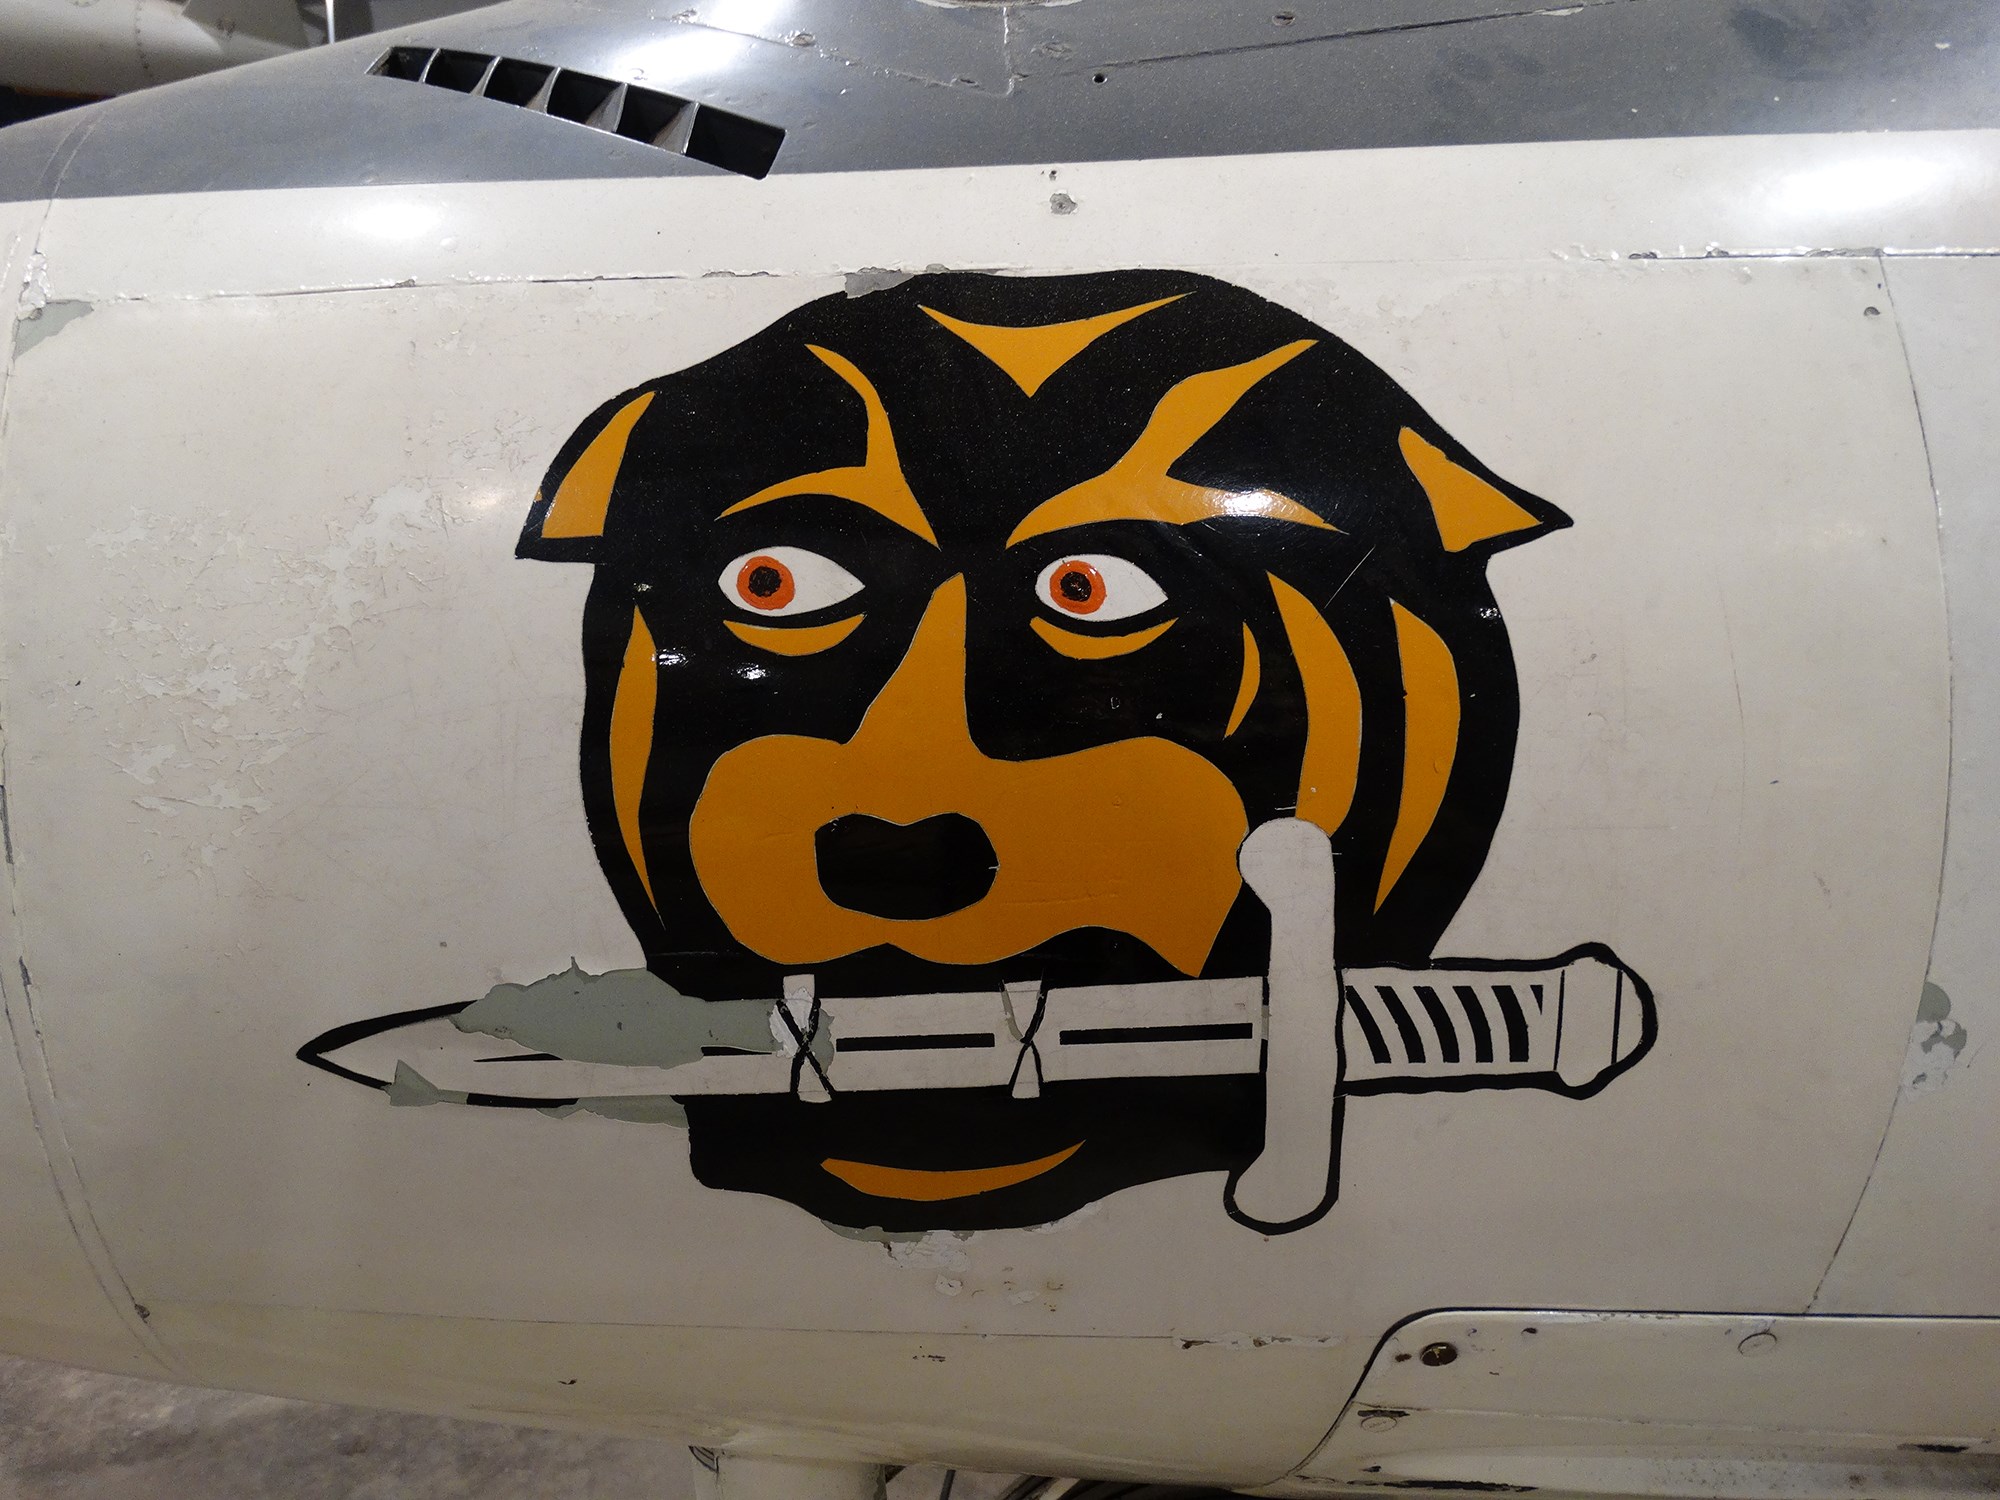 The side of a plane with a dog holding a knife in its mouth painted on it